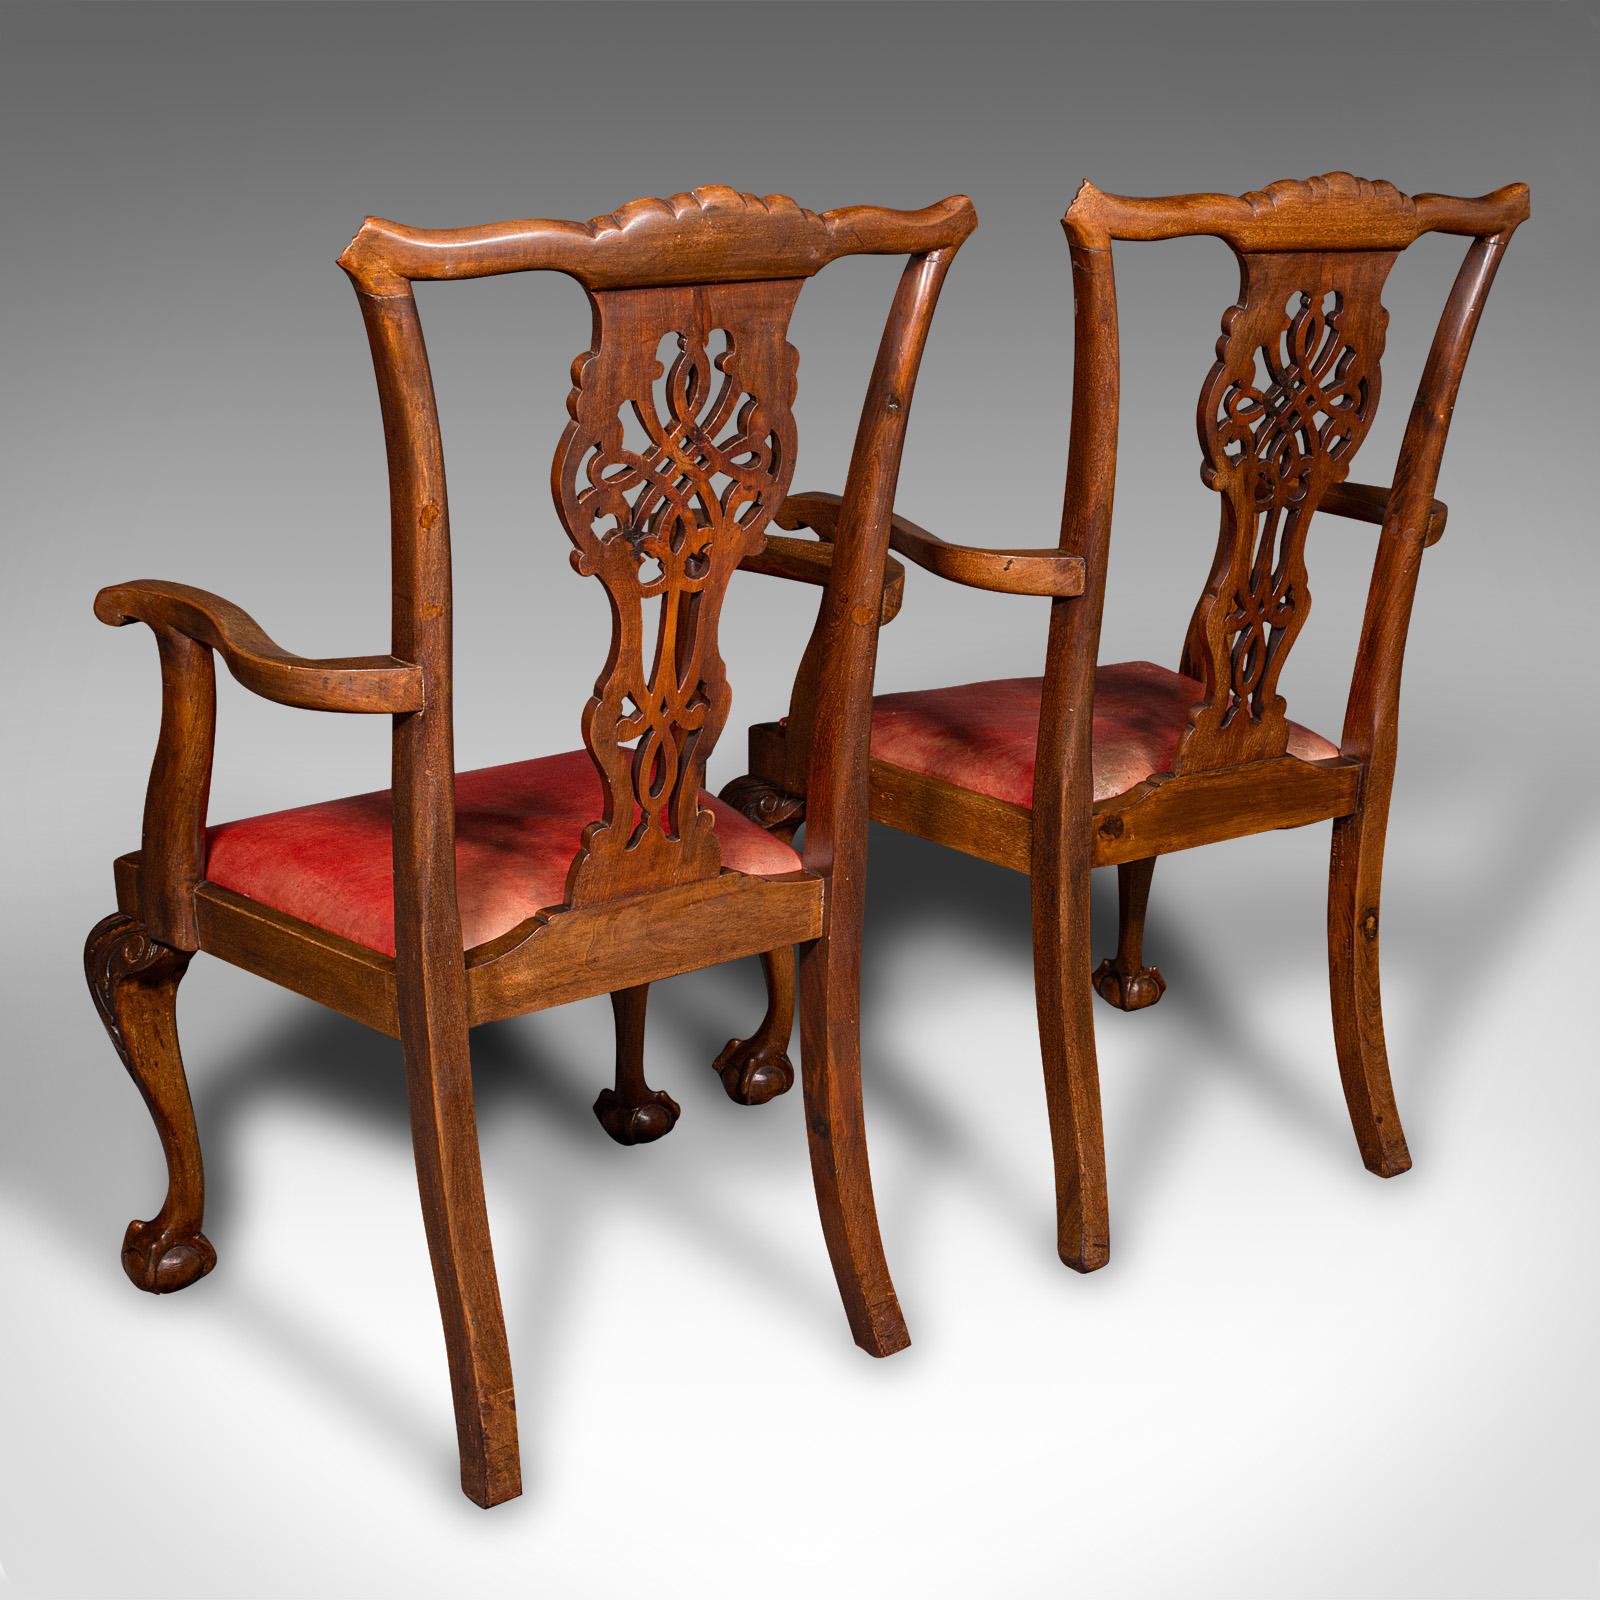 British Set Of 8 Antique Dining Chairs, English, Leather, Chippendale Revival, Victorian